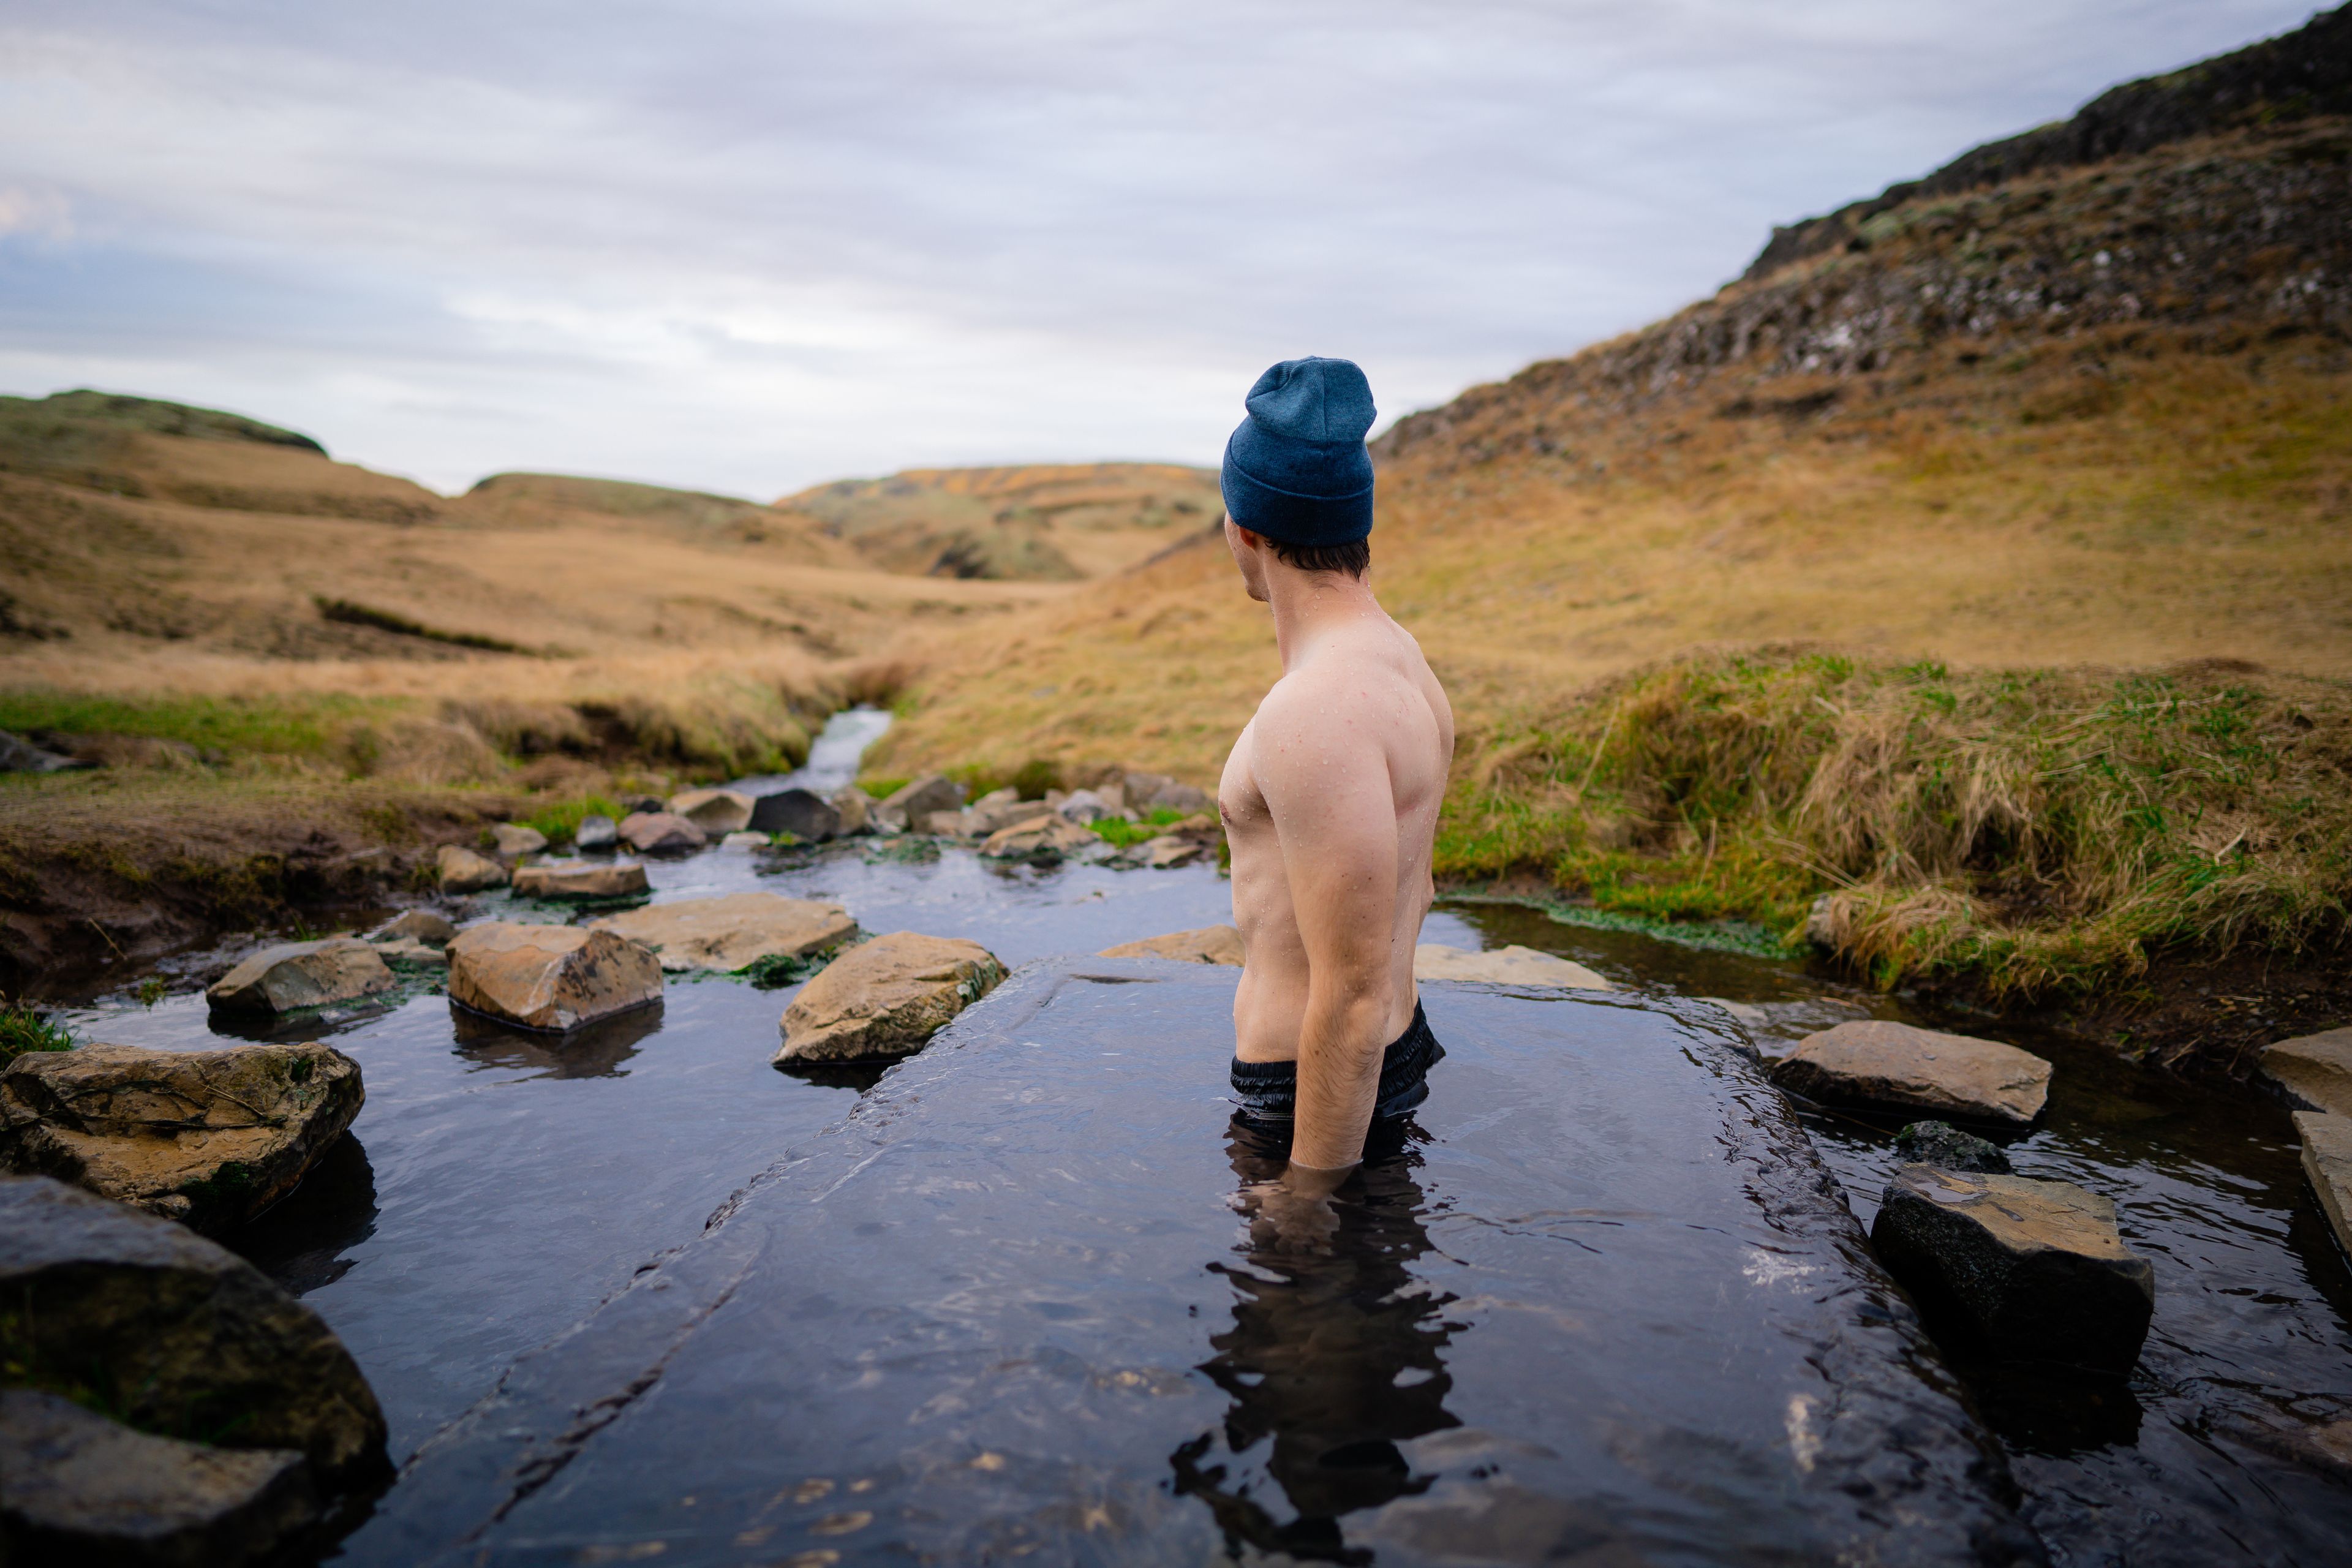 Man relaxing in a small geothermal hot spring pool in Hrunalaug, Iceland